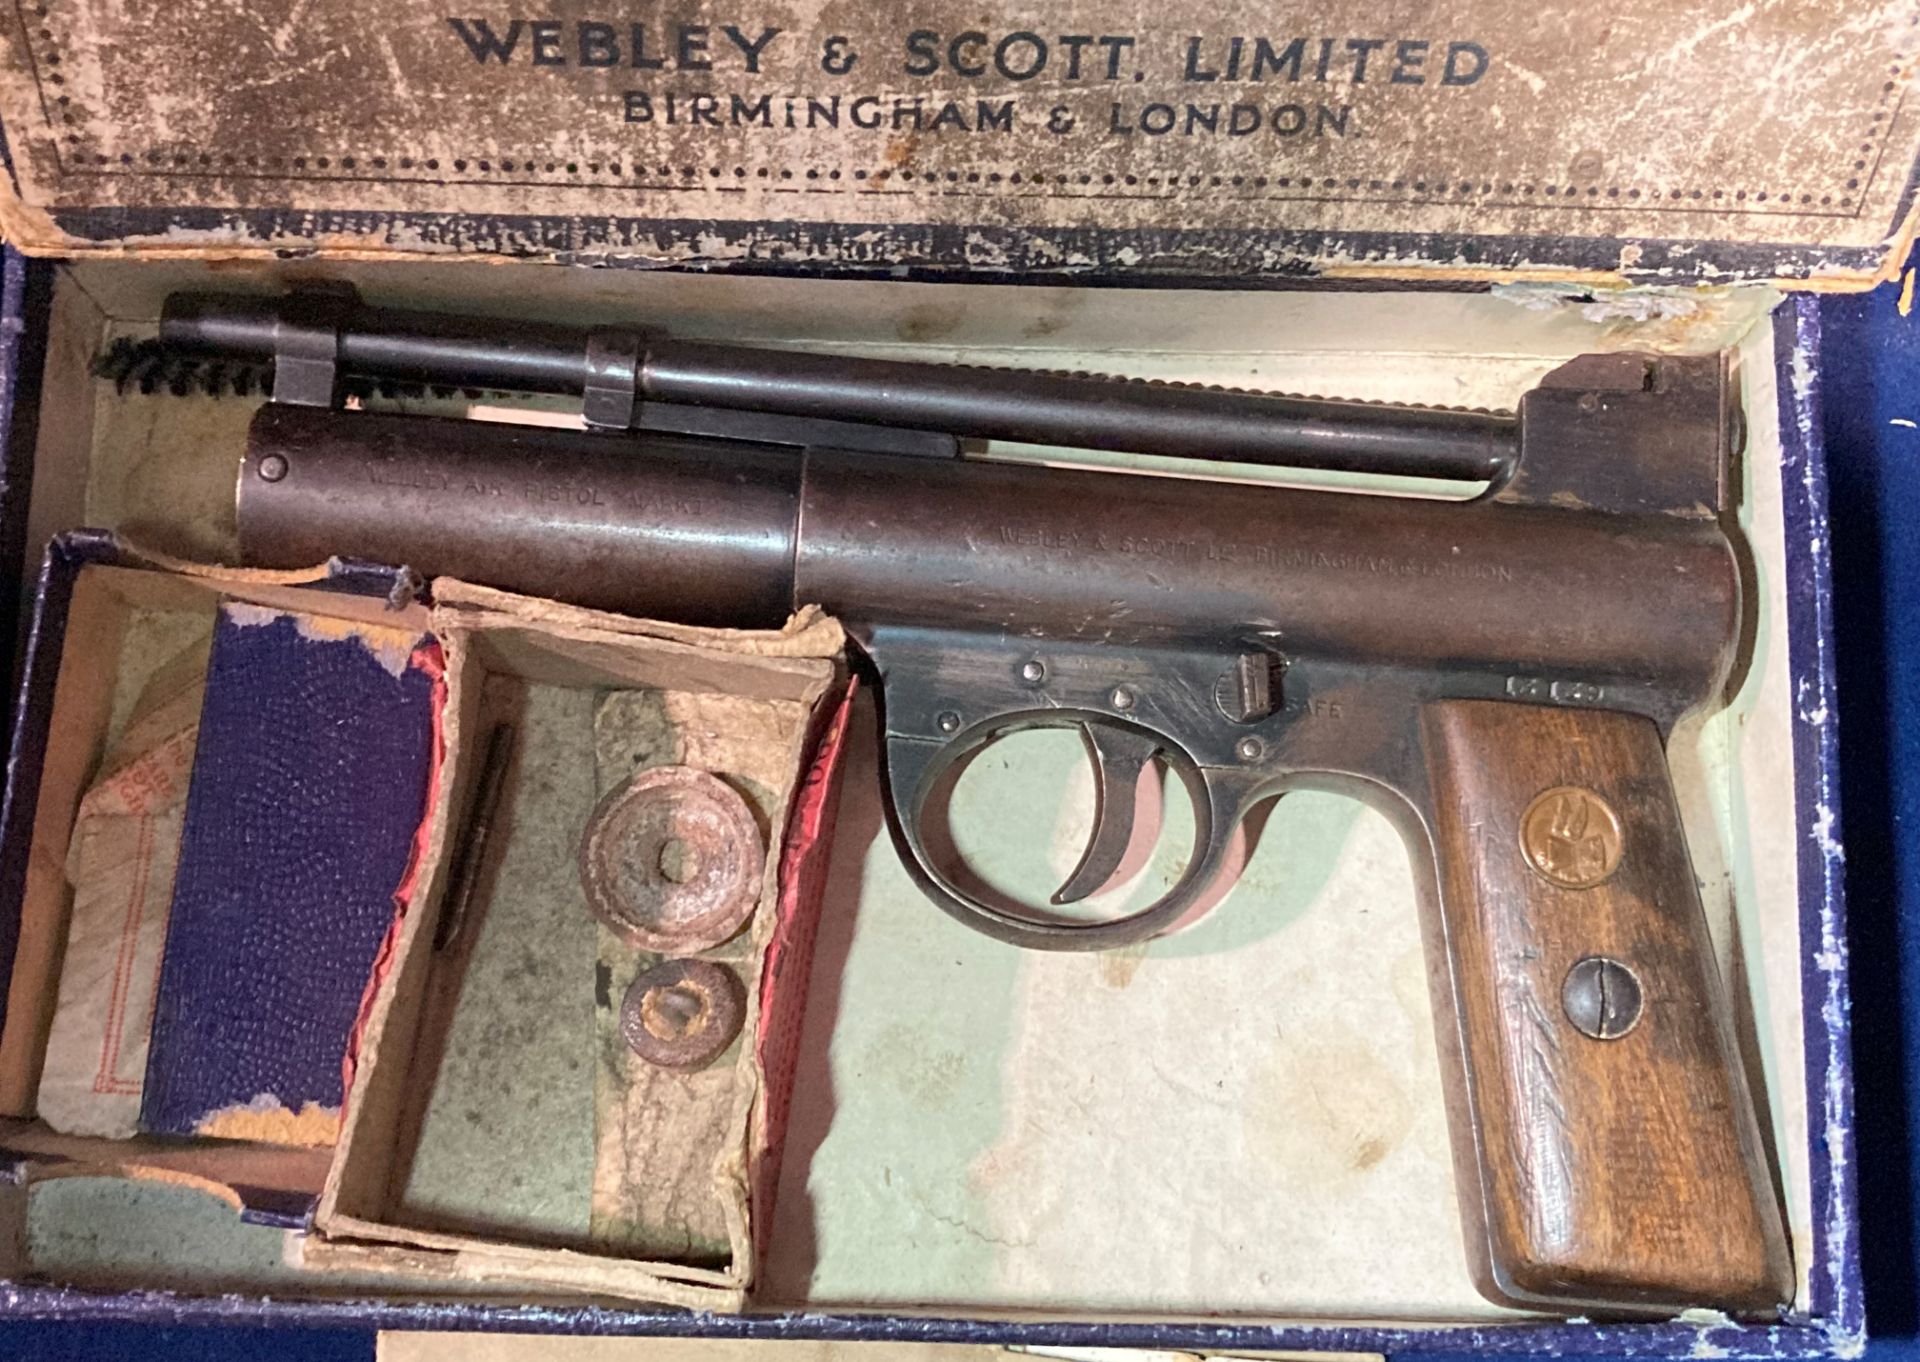 The New Webley Air Pistol Mark 1 complete with manual and box (Saleroom location: S2 counter 3) - Image 3 of 6